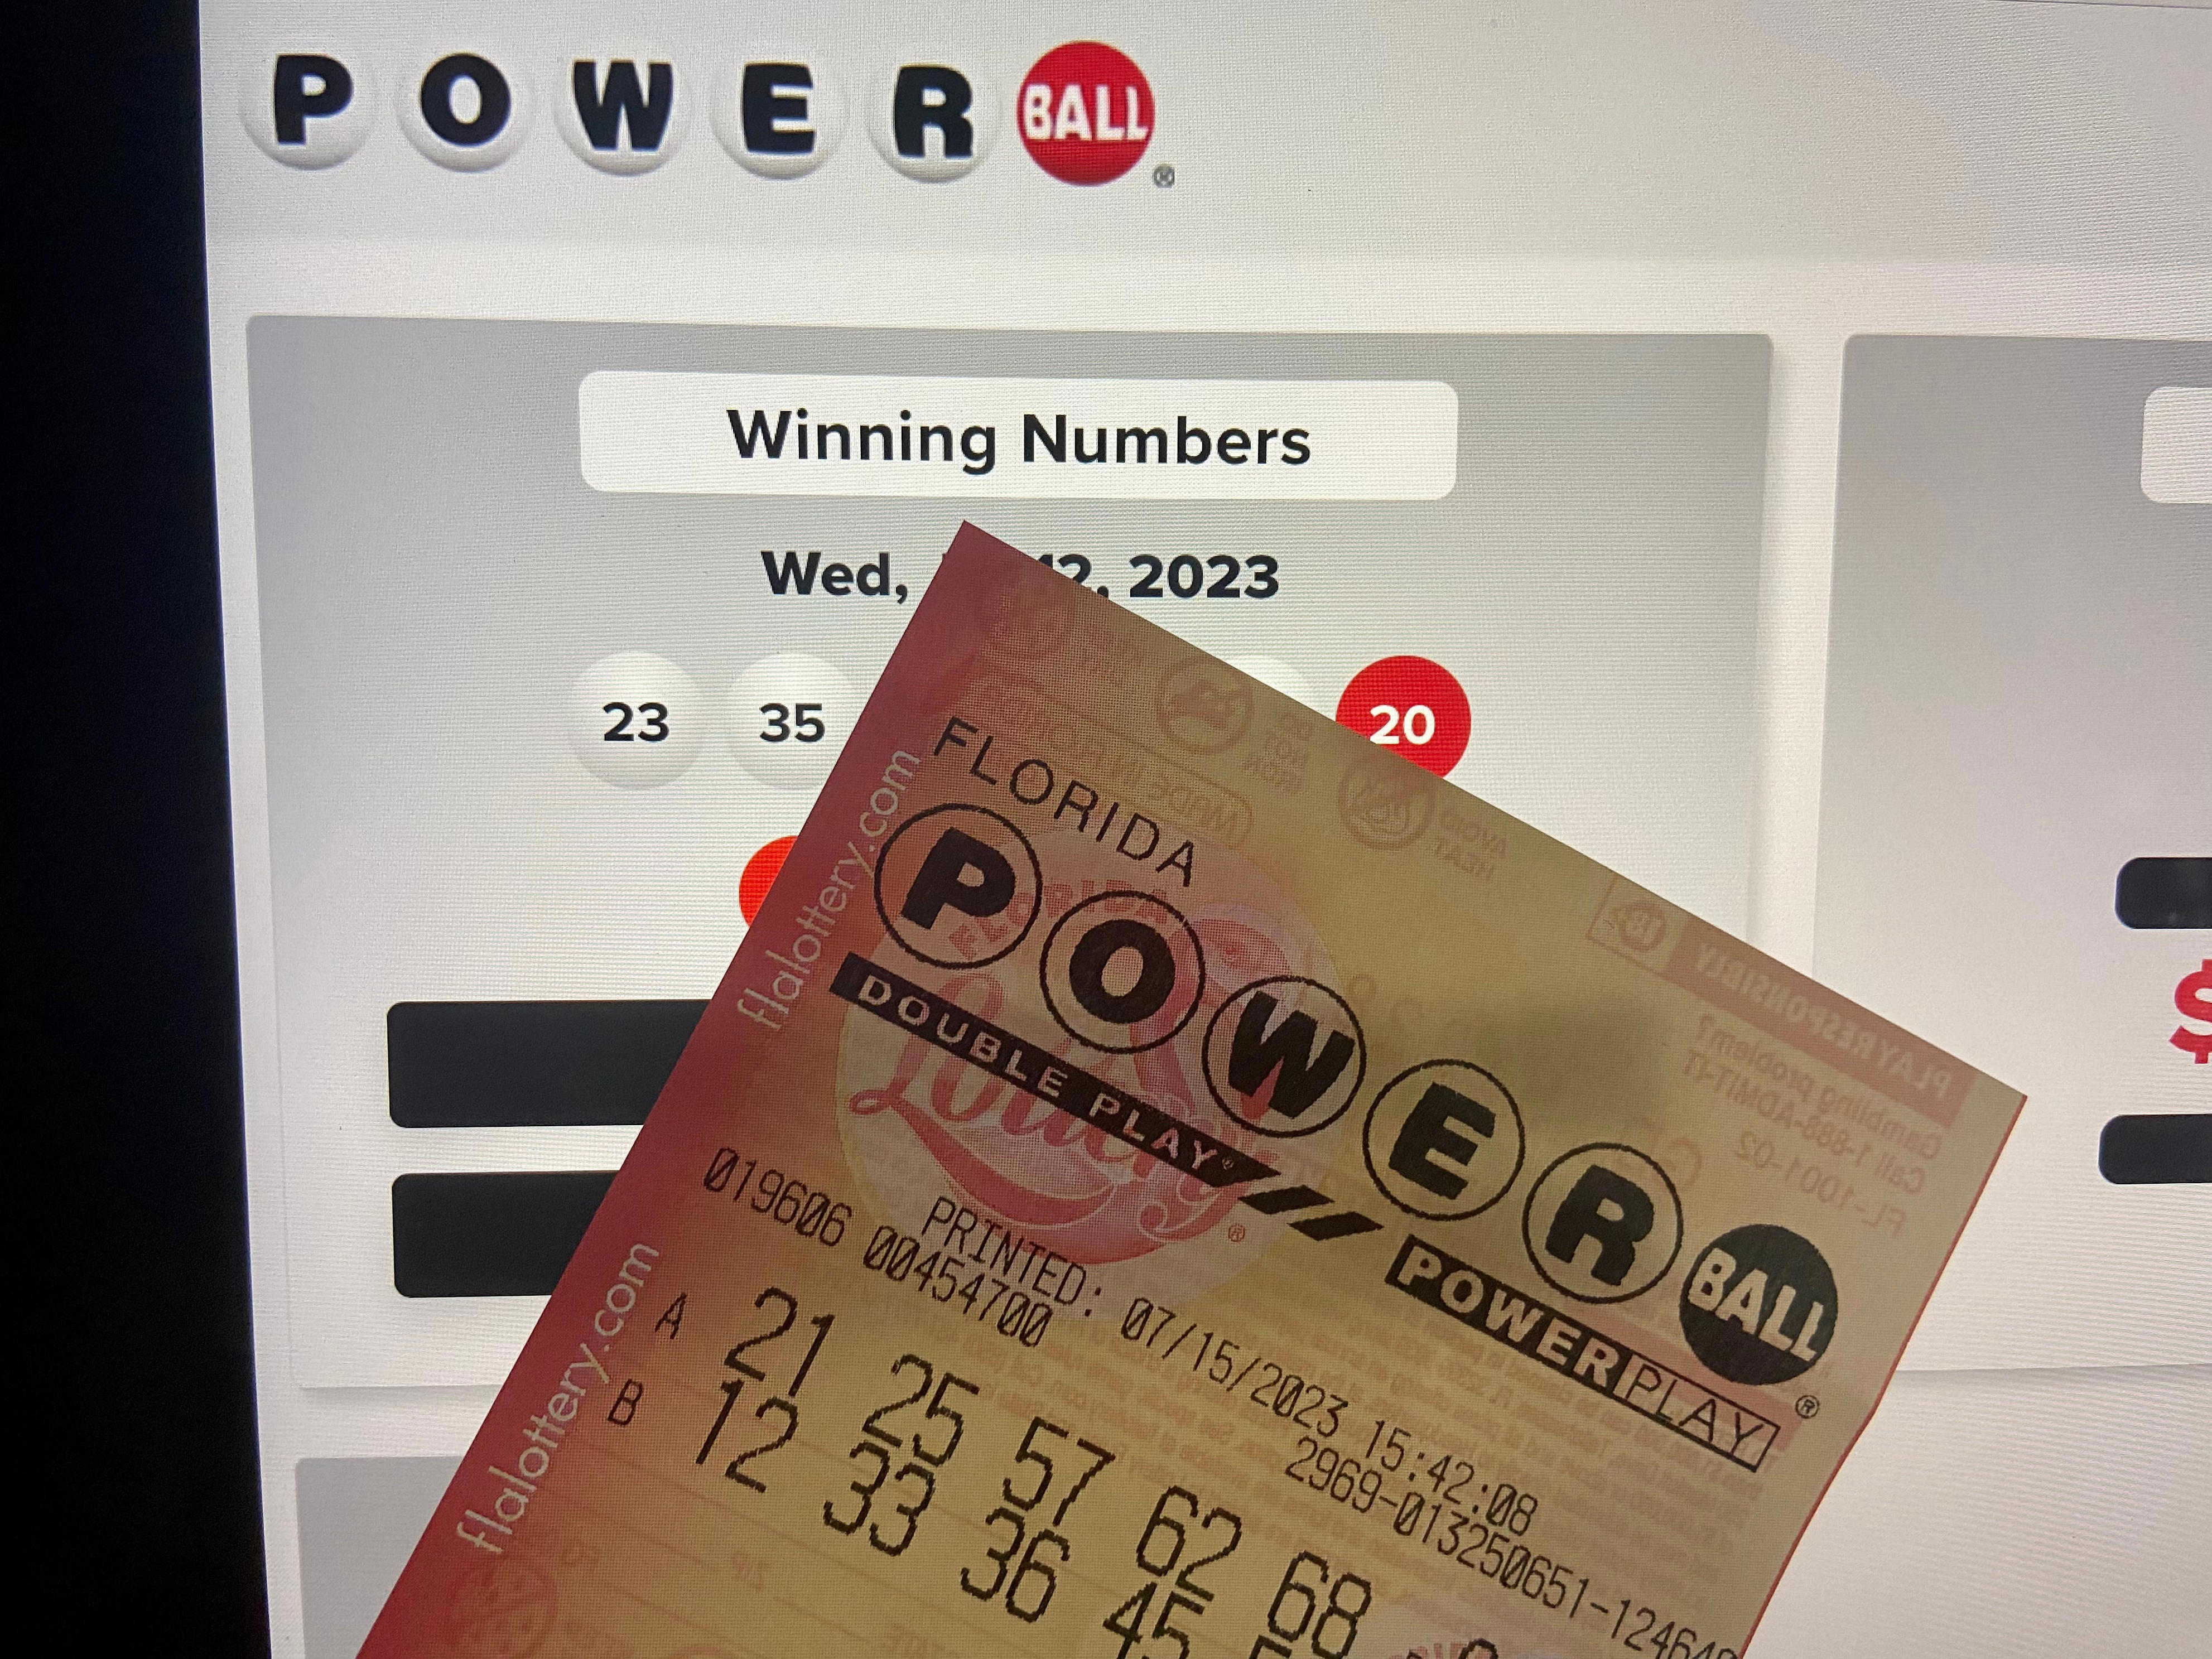 Powerball winning numbers Jan. 13, 2024 for the 77 million jackpot